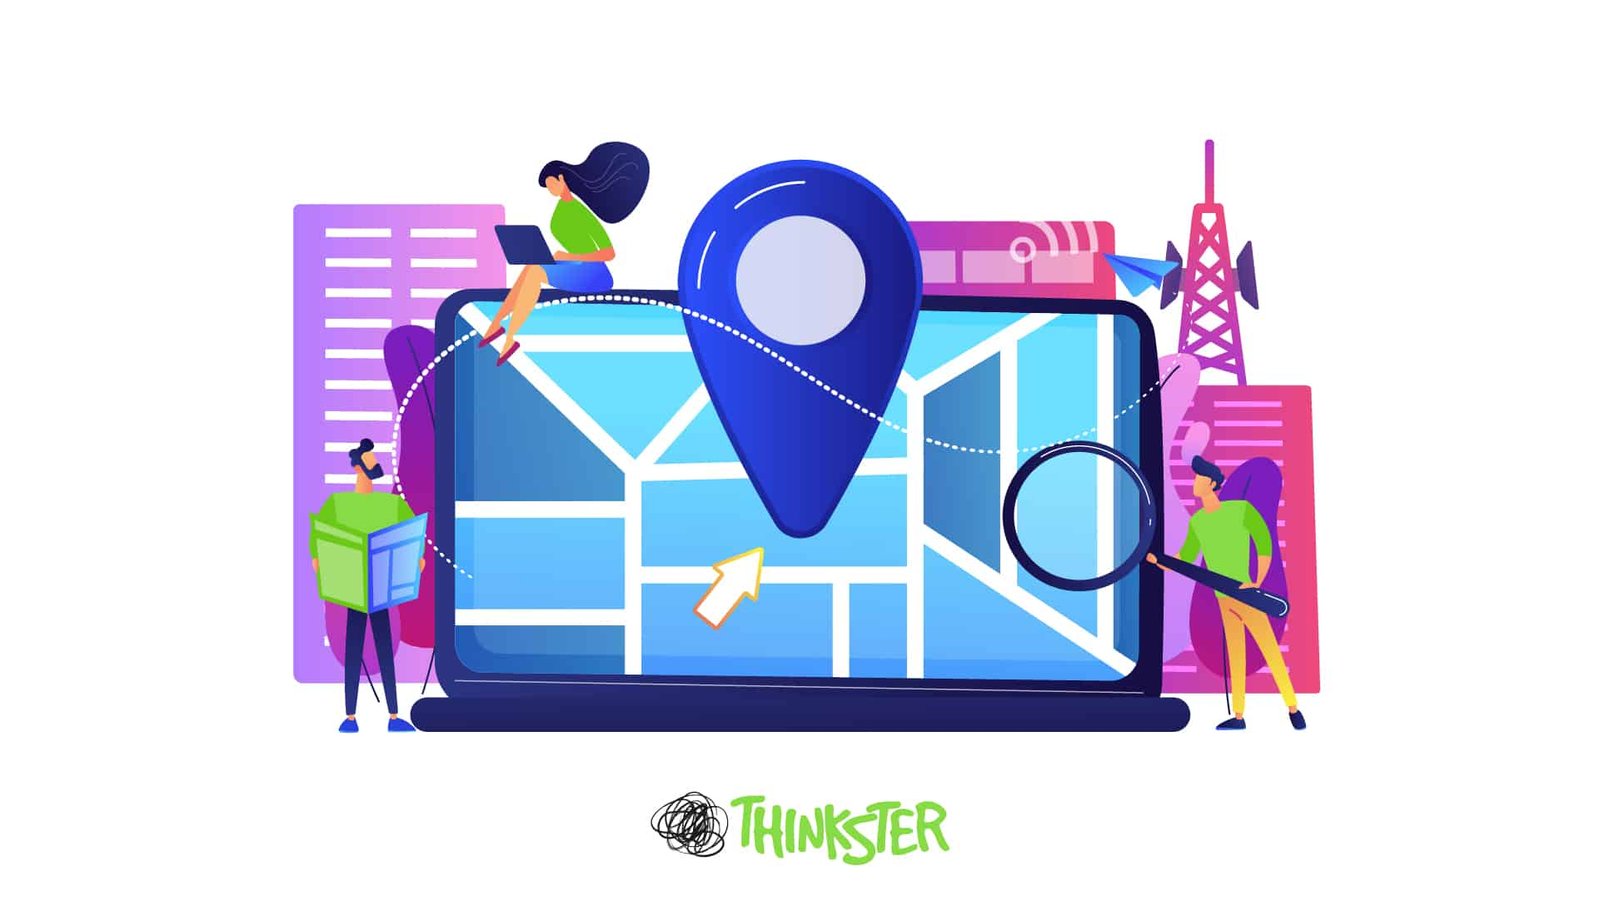 Why Local SEO is Important?